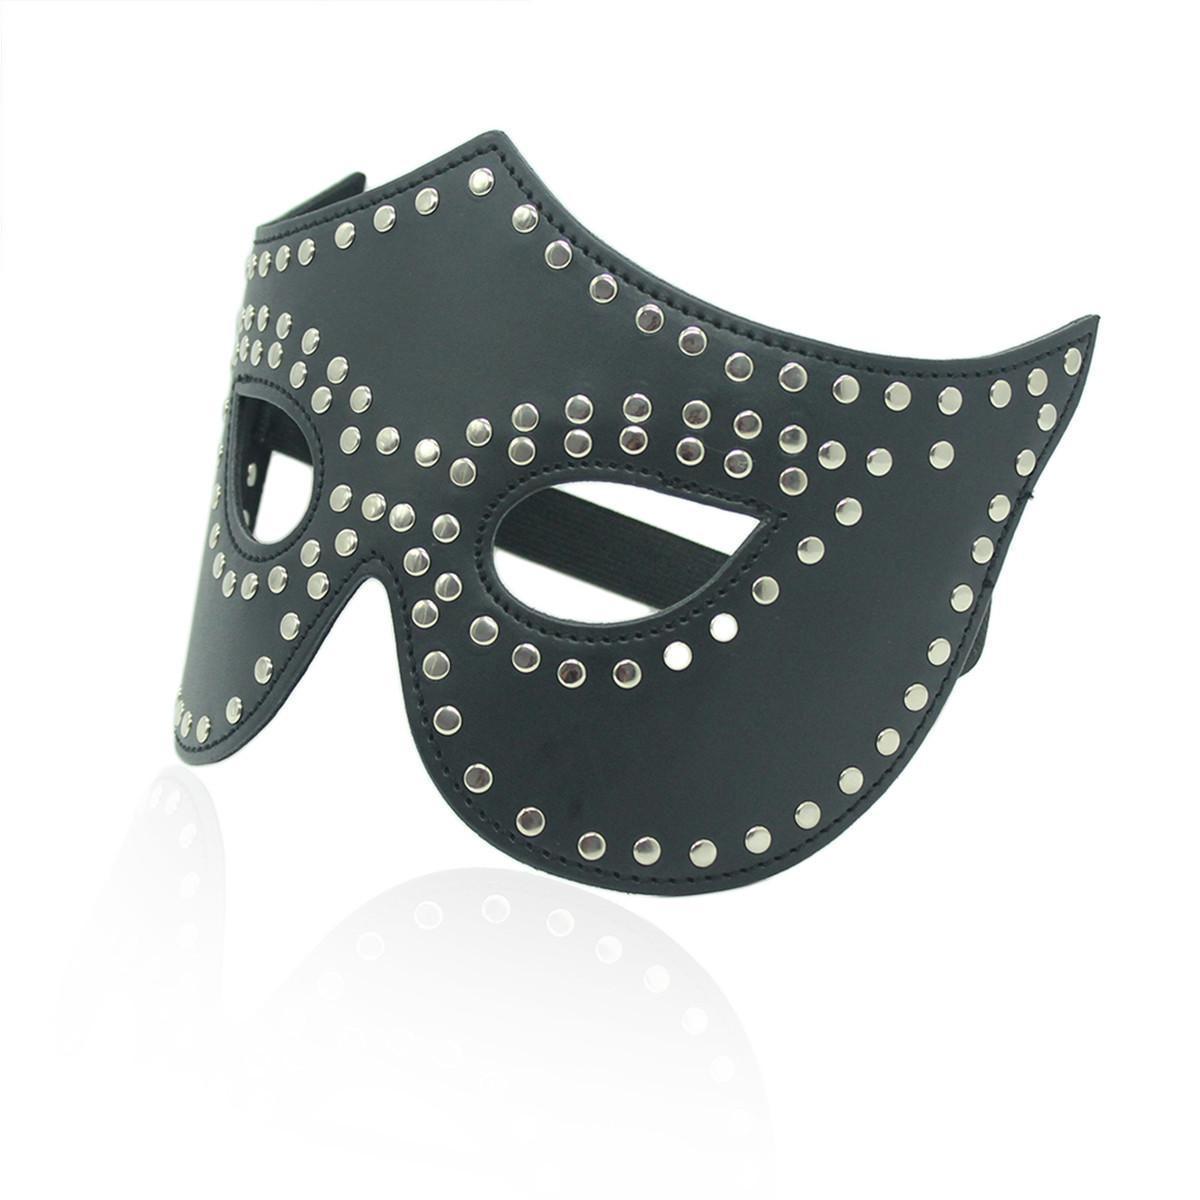 Fun eye mask, Pu witch mask, COSPLAY Ghost Festival mask props